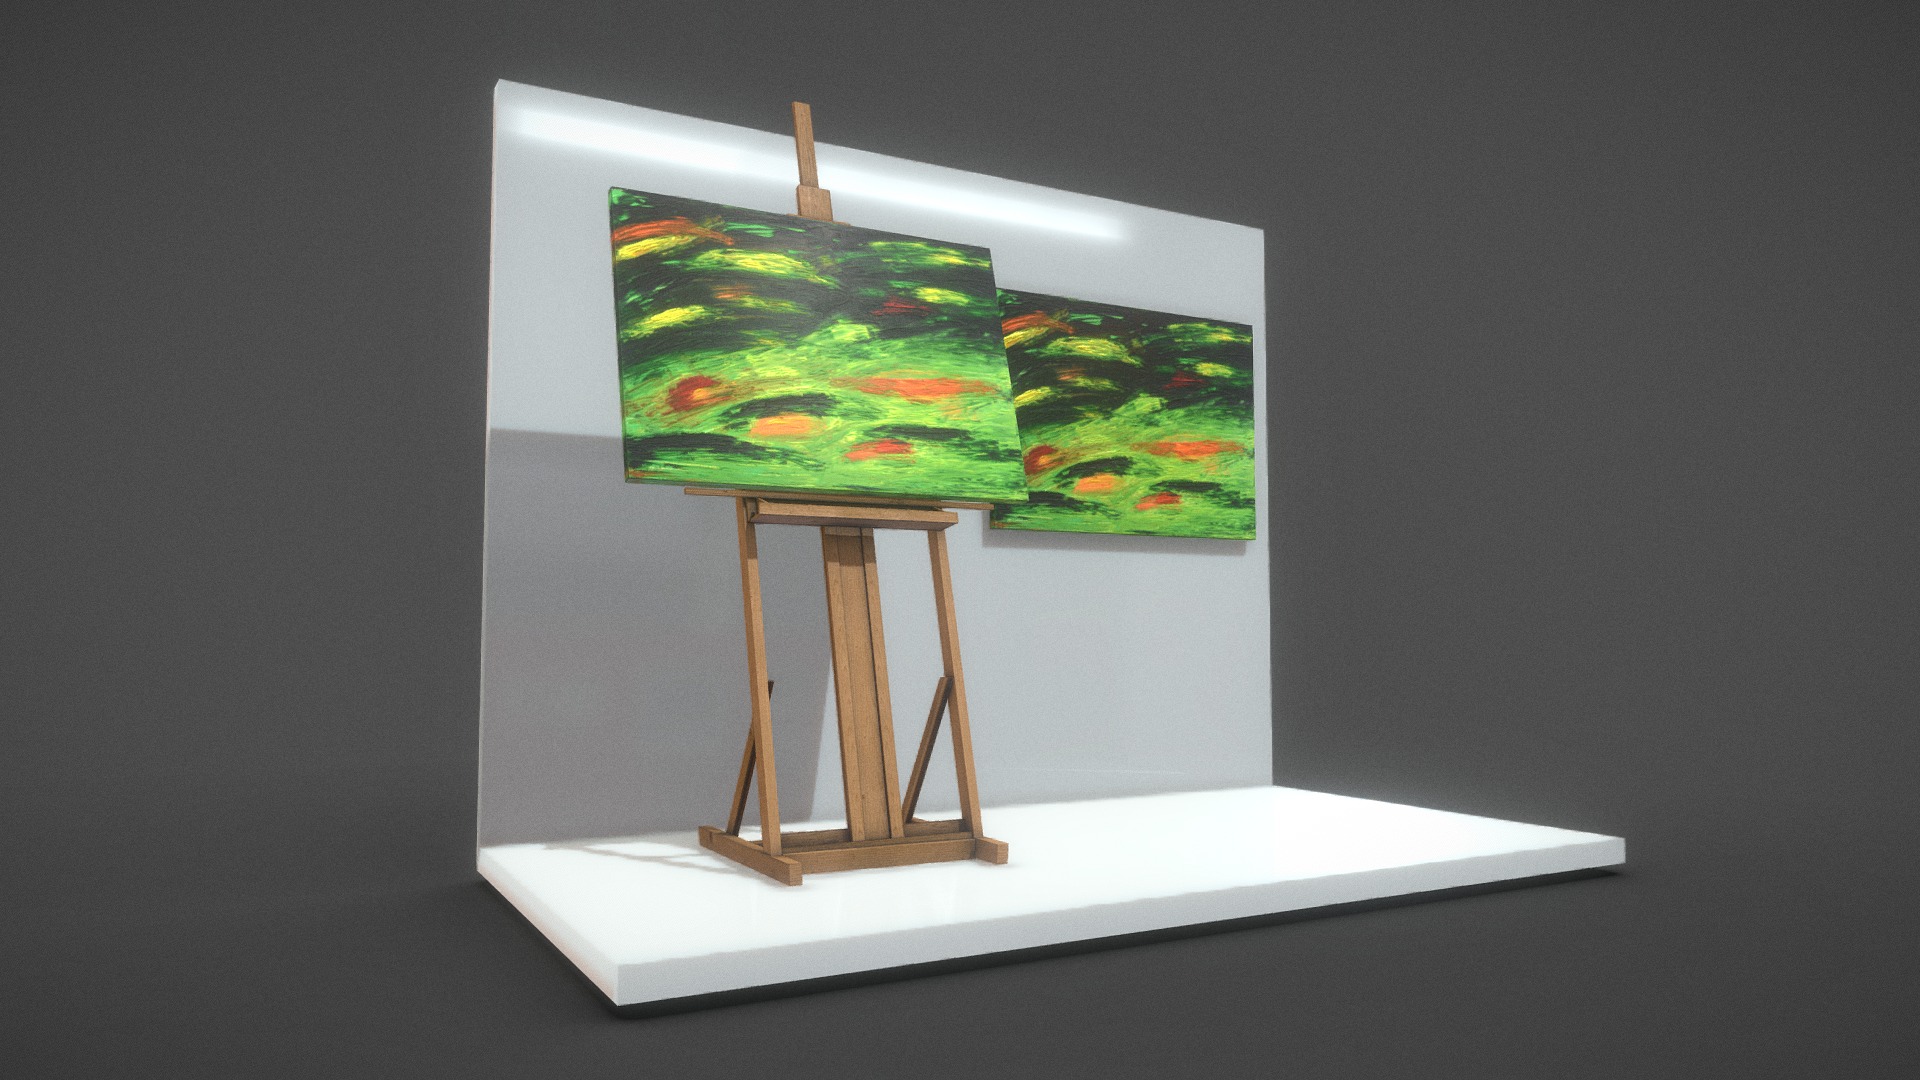 3D model Nameless – Oil Painting - This is a 3D model of the Nameless - Oil Painting. The 3D model is about a painting on a stand.